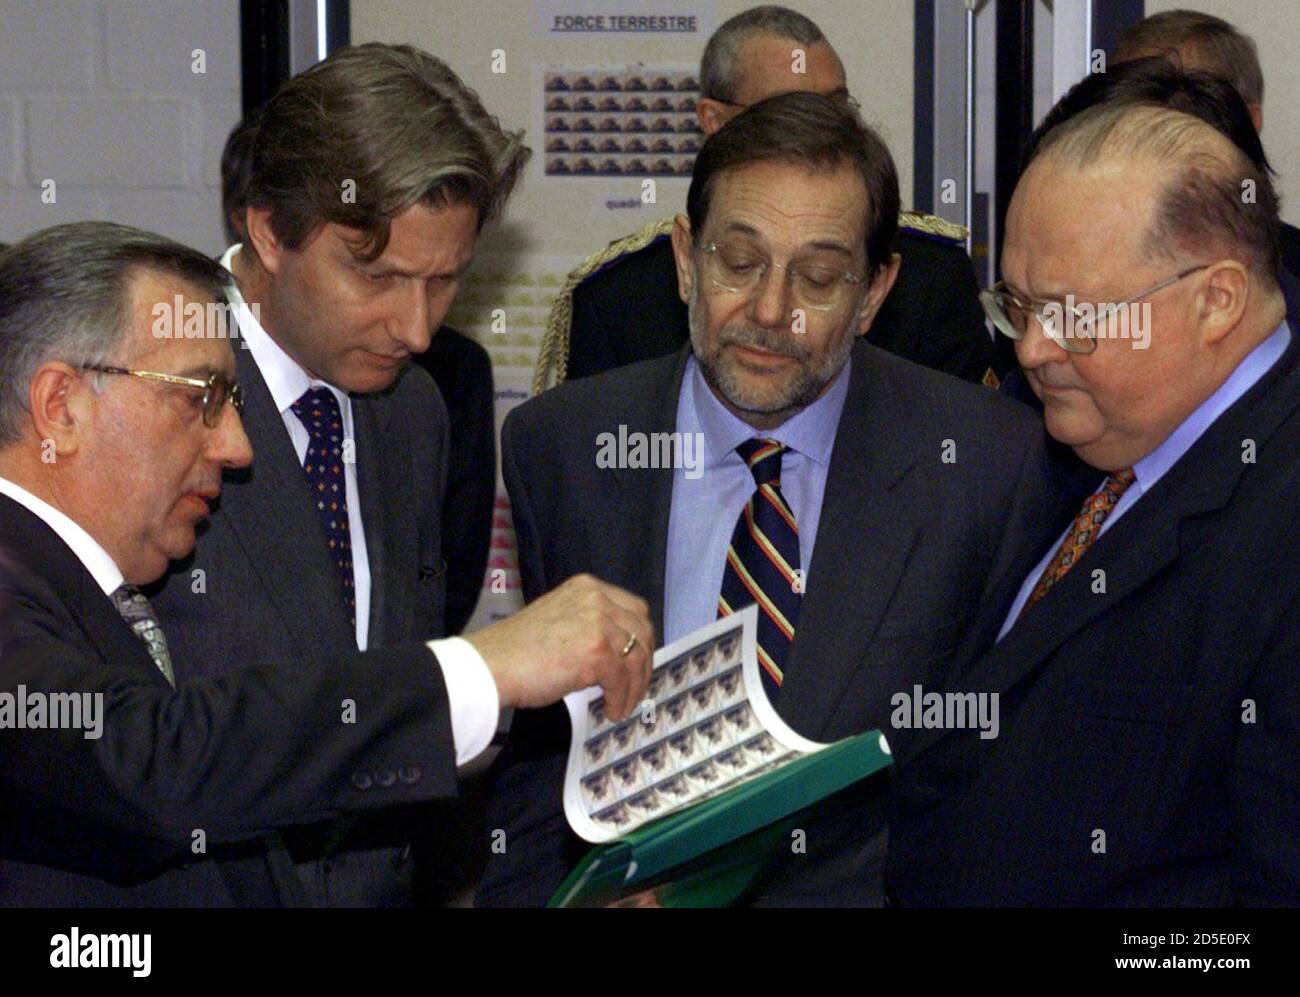 L-R) The head of Belgium's stamp printing office, Jean Wauters, shows  samples of new postage stamps commemorating NATO's 50th anniversary this  year to Belgium's Prince Philippe, NATO Secretary General Javier Solana and